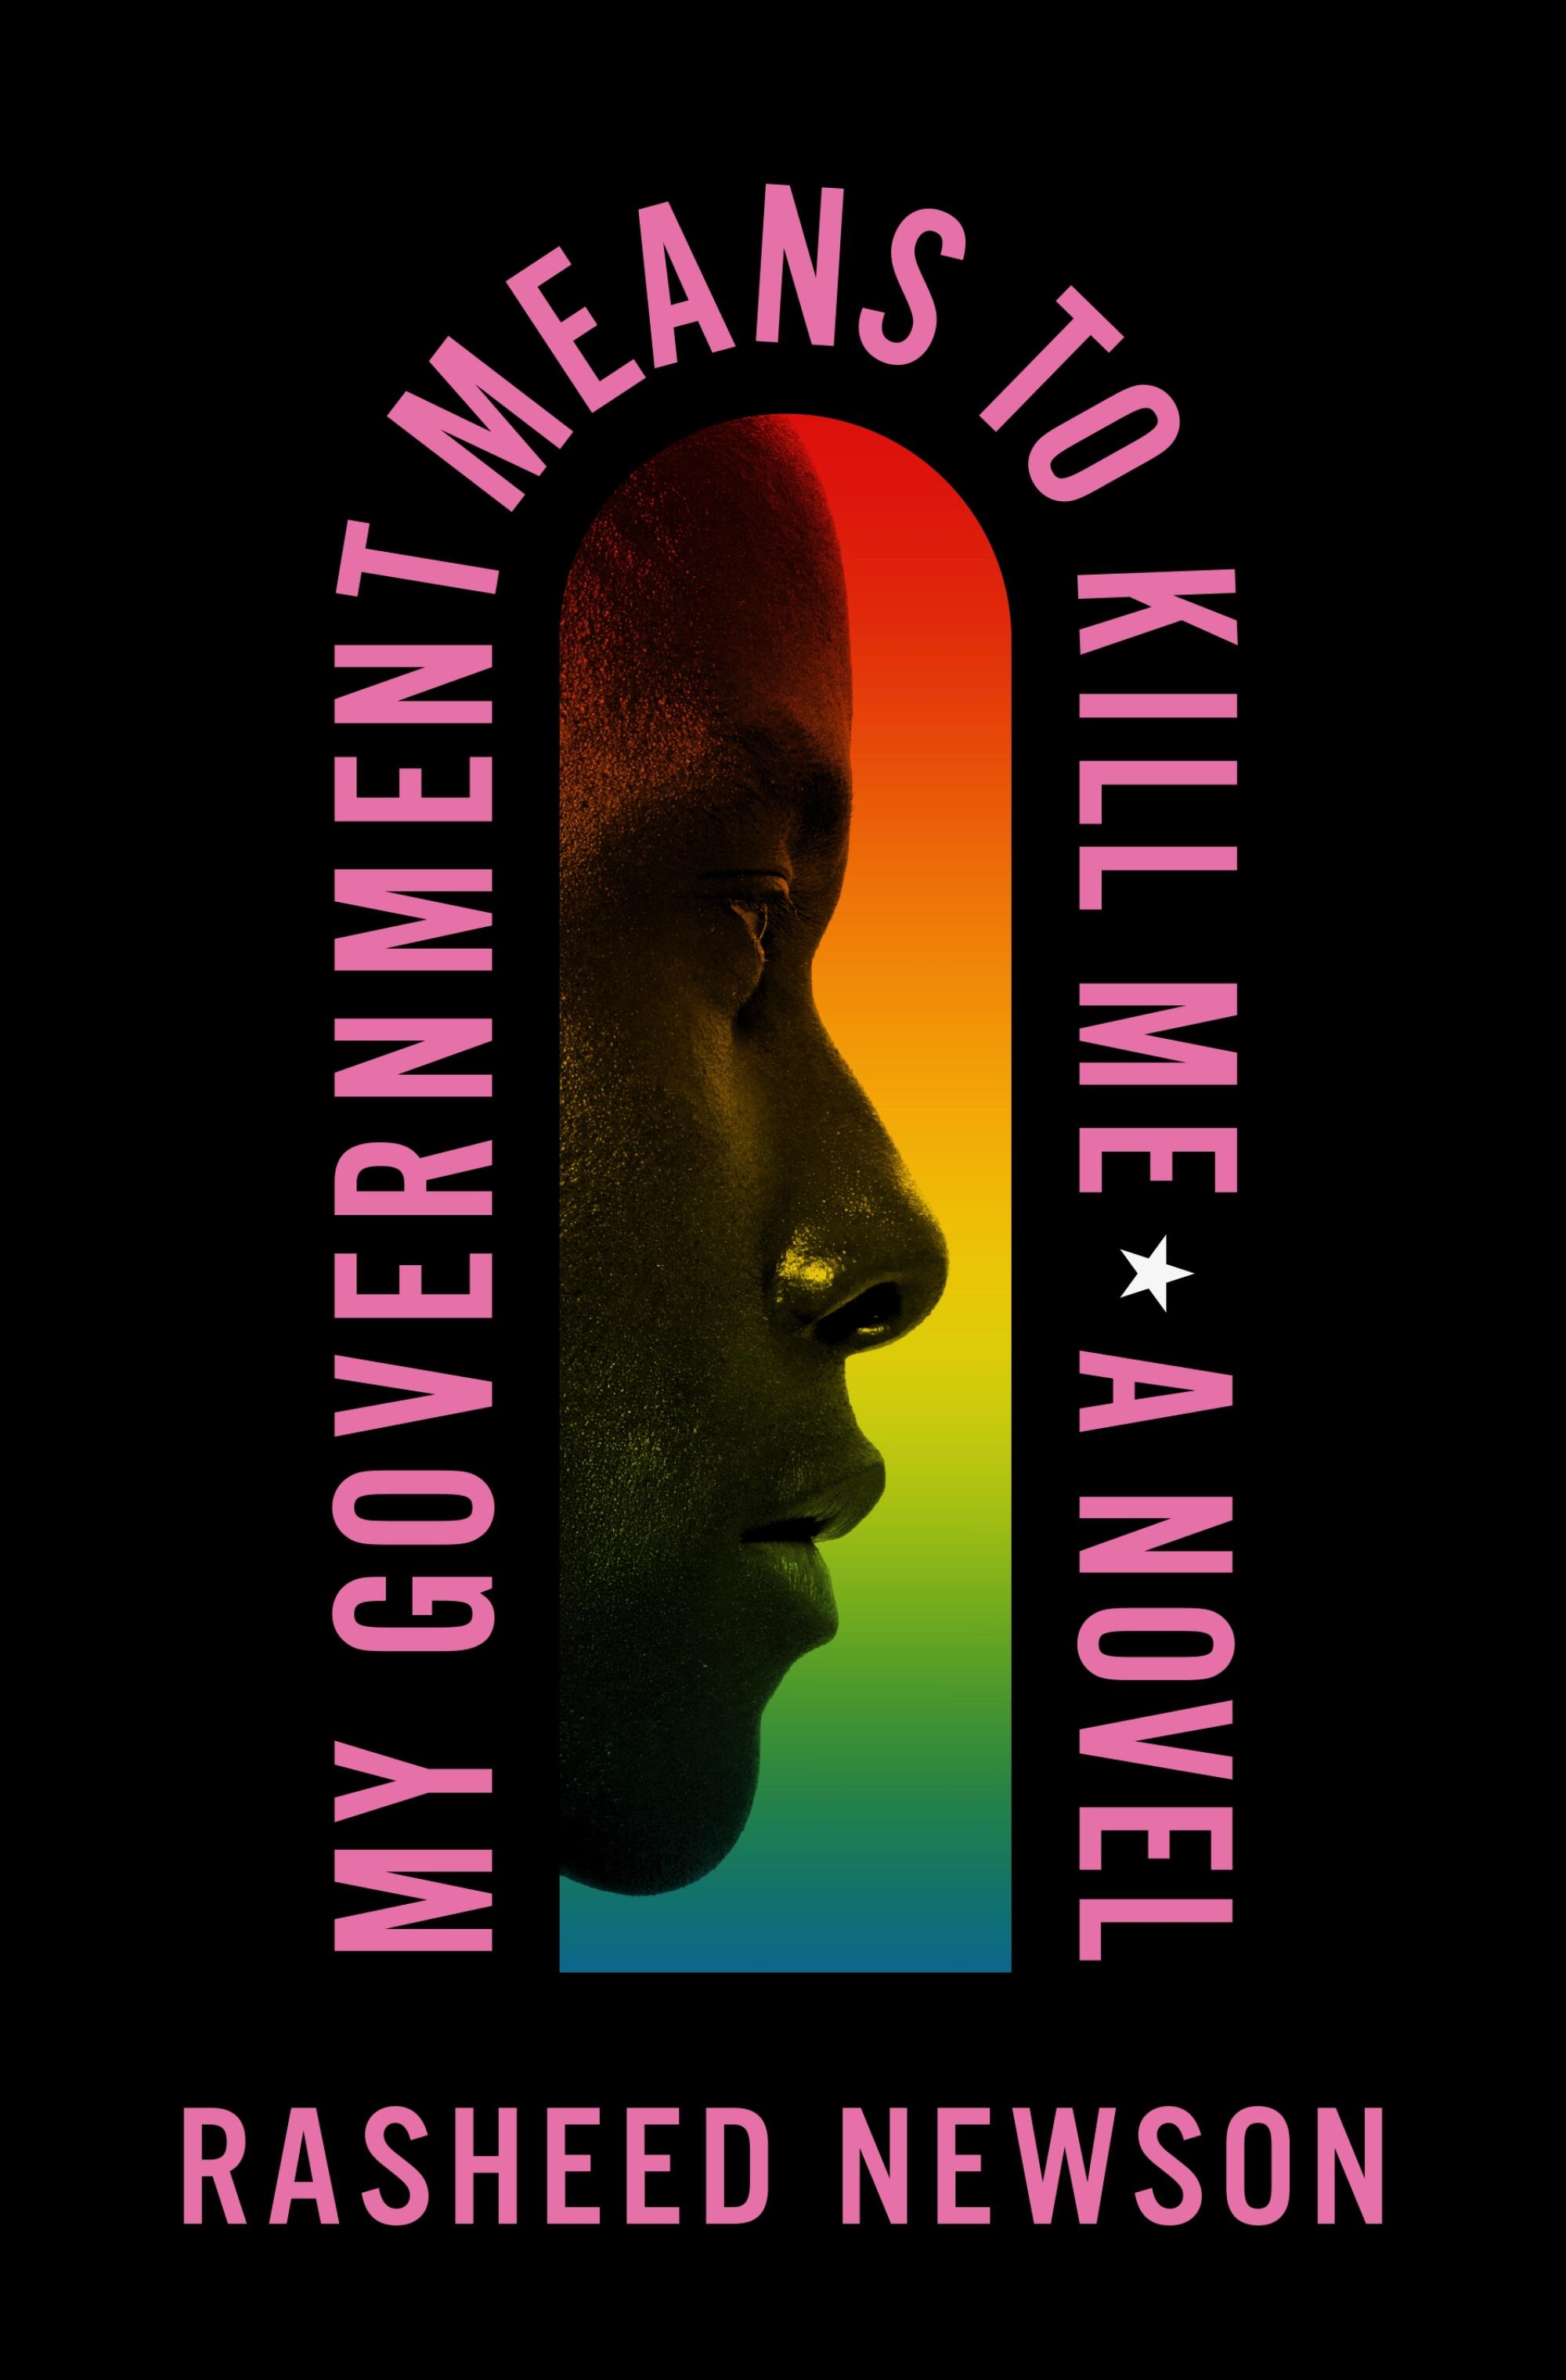 "My Government Wants To Kill Me: A Novel" by Rasheed Newson